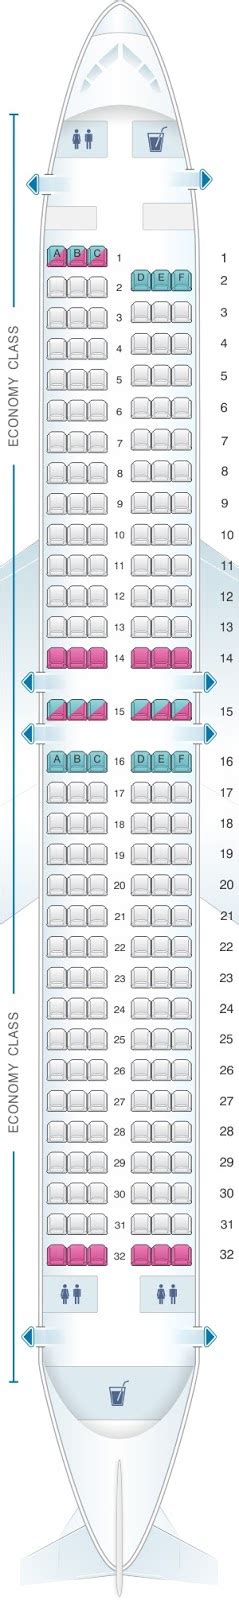 Lovely Boeing 737 800 Seat Map Seat Inspiration